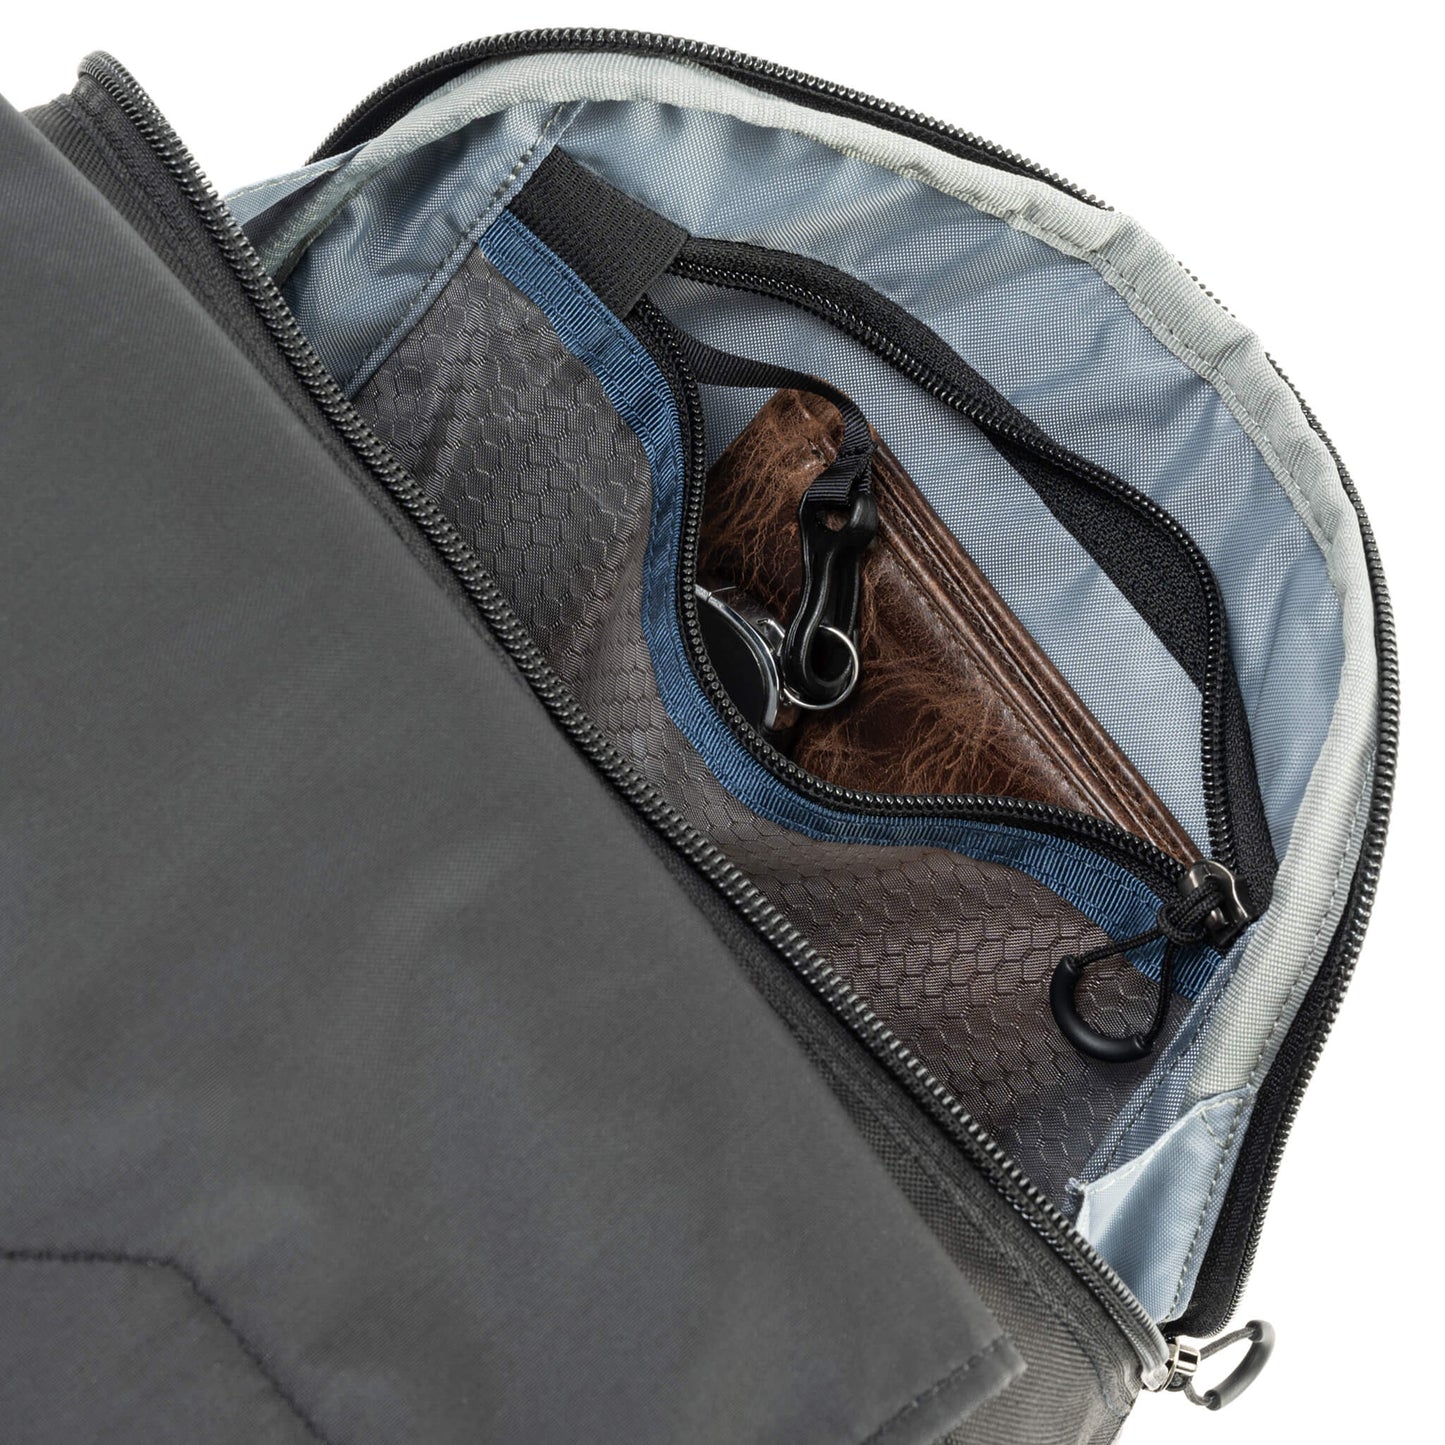 
                  
                    Zippered security pocket in front pocket with clear material to see contents
                  
                